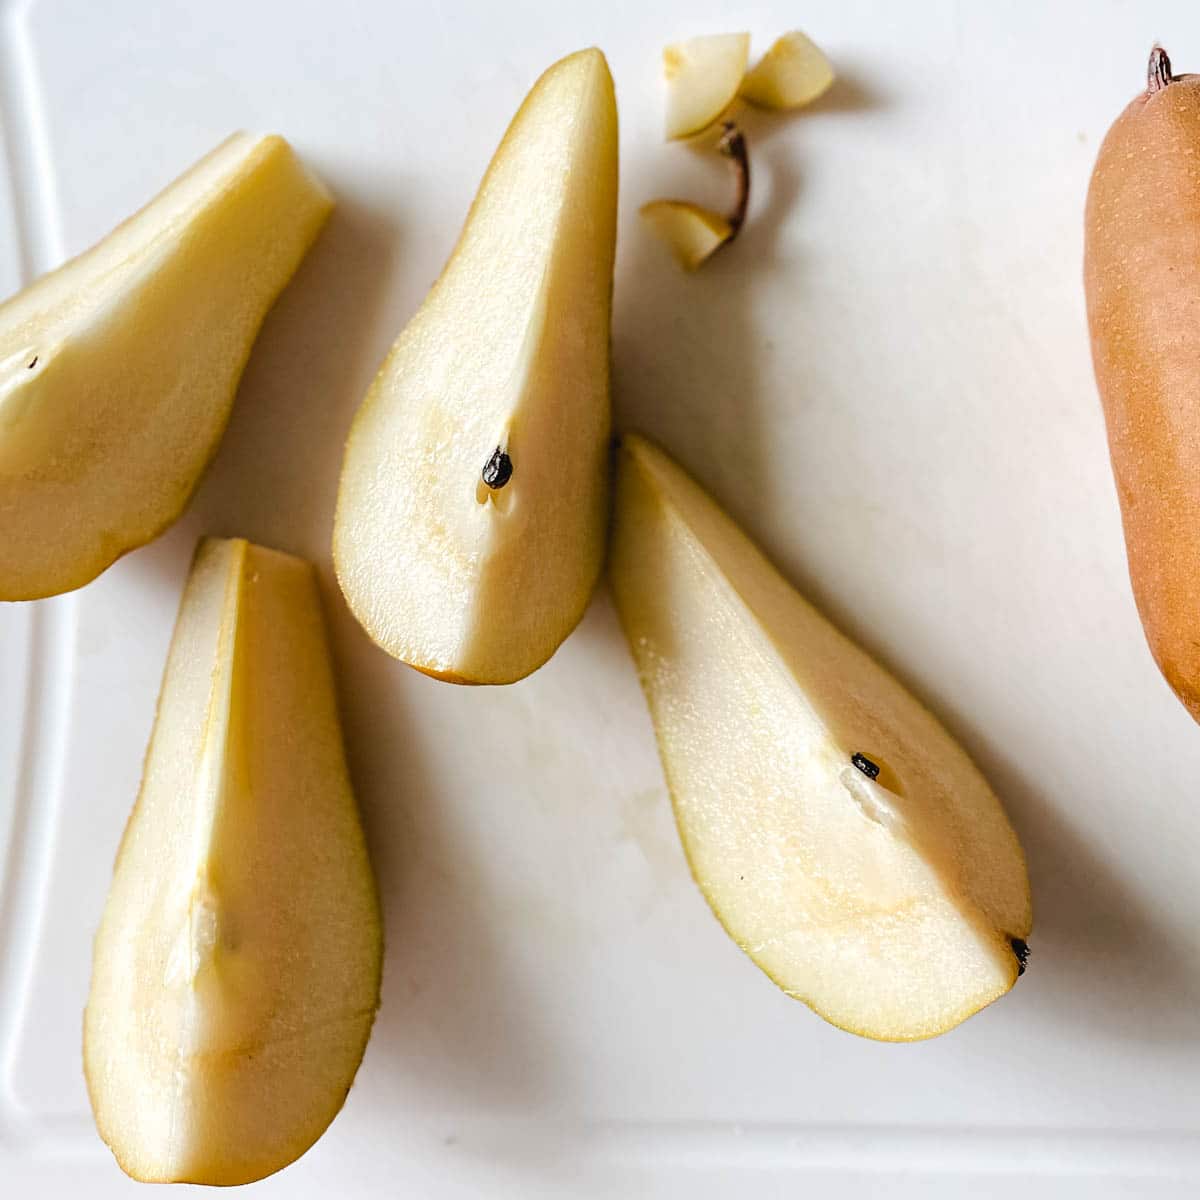 Pears are sliced into wedges.